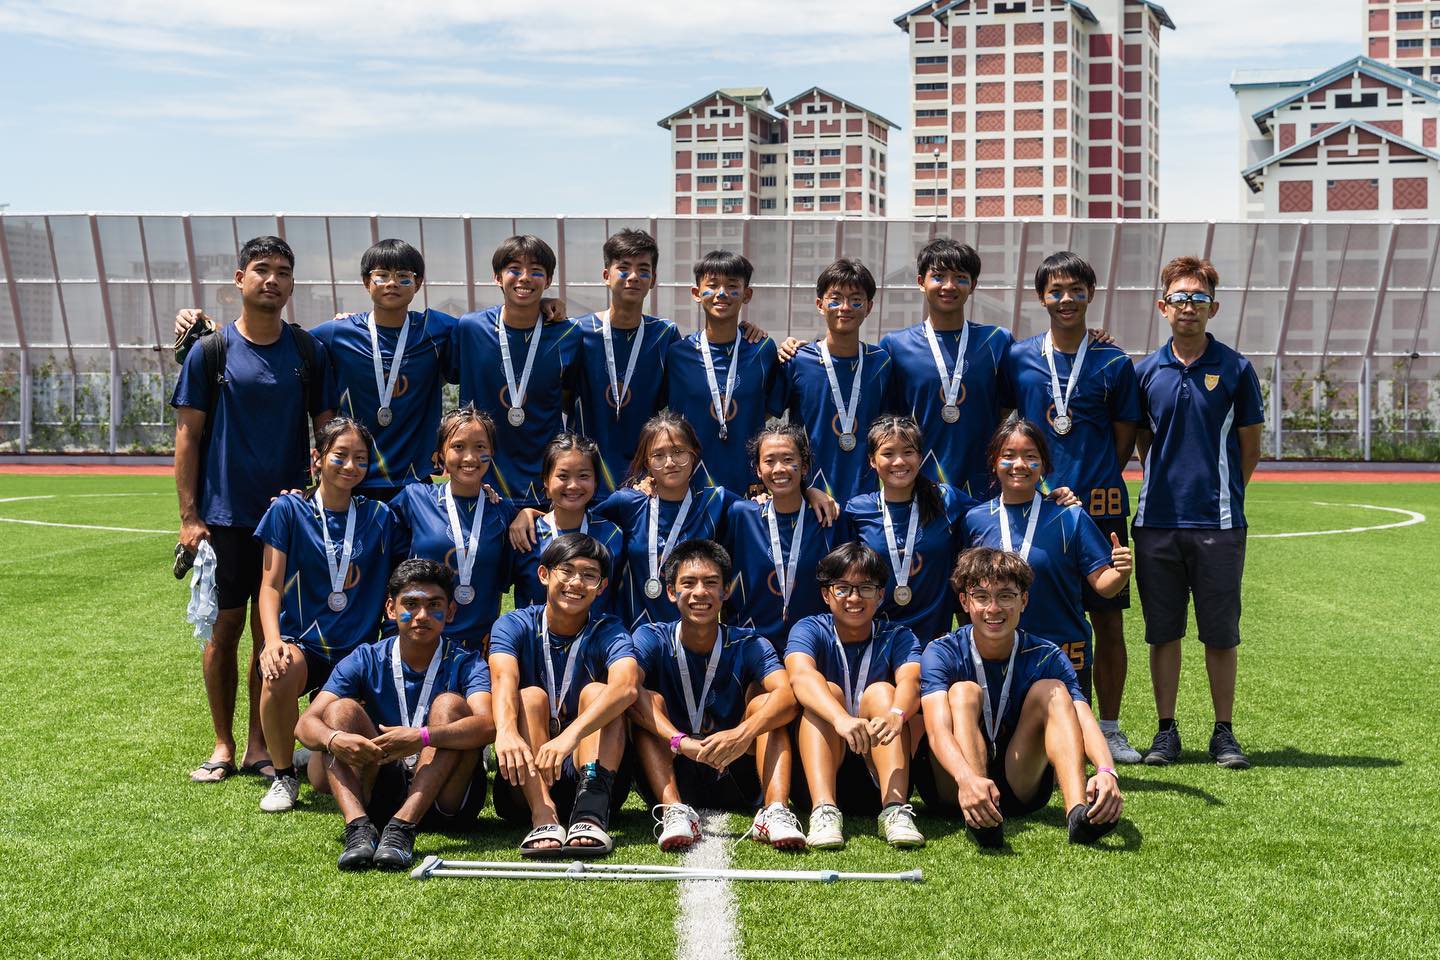 Inter-JCs #Ultimate: In a historic final for both sides, Catholic Junior College (pic) went down 8-2 to Eunoia Junior College in their first-ever final appearance, finishing second in the tournament.

Story to come on REDSPORTS.SG. (Photo by Bryan Foo/Red Sports)